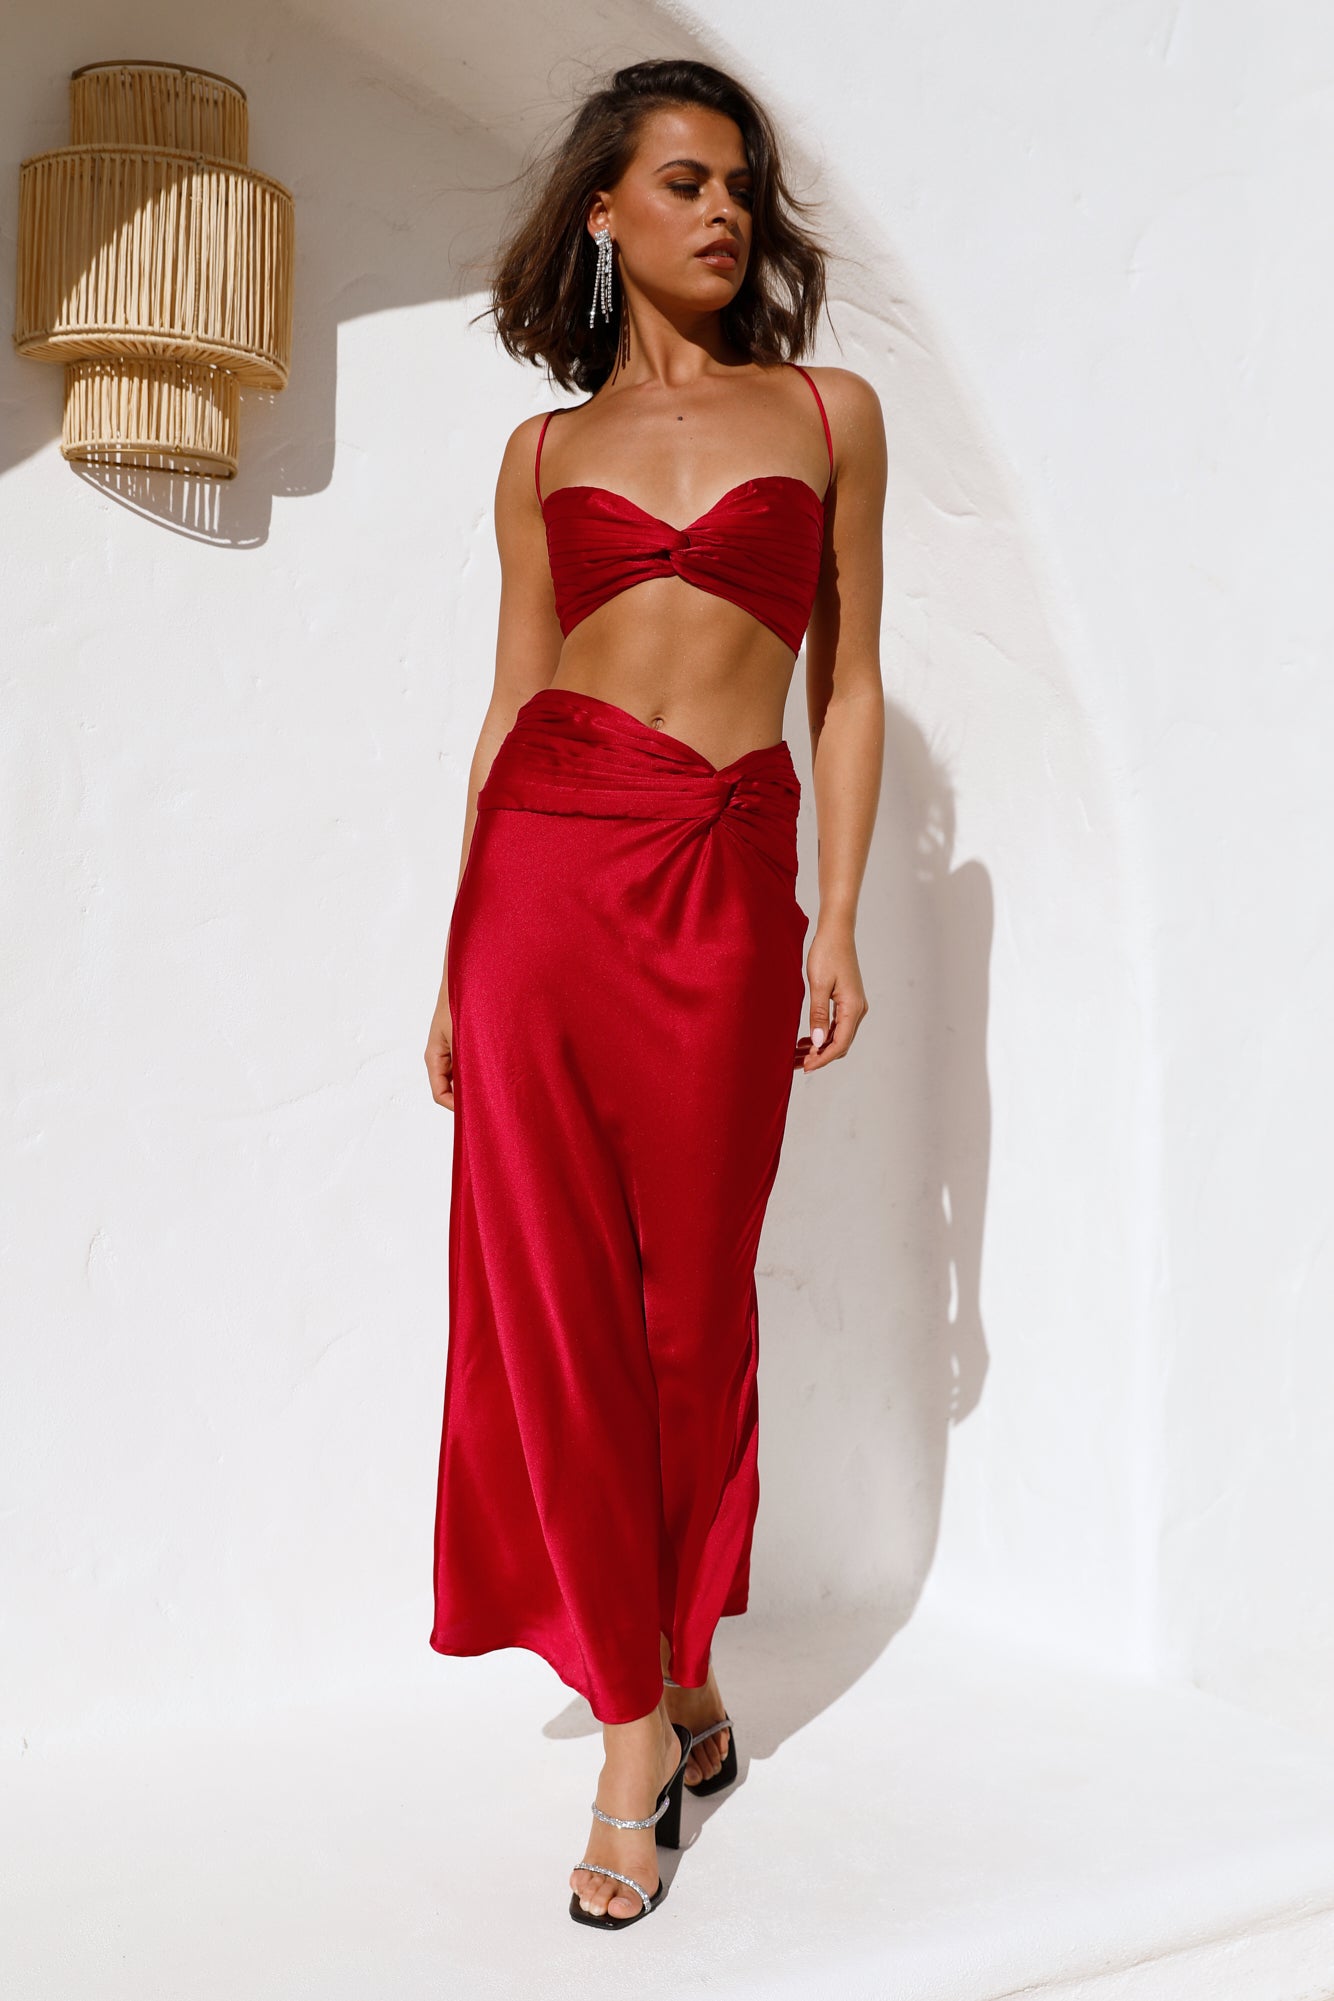 Keep Living Large Maxi Skirt Red